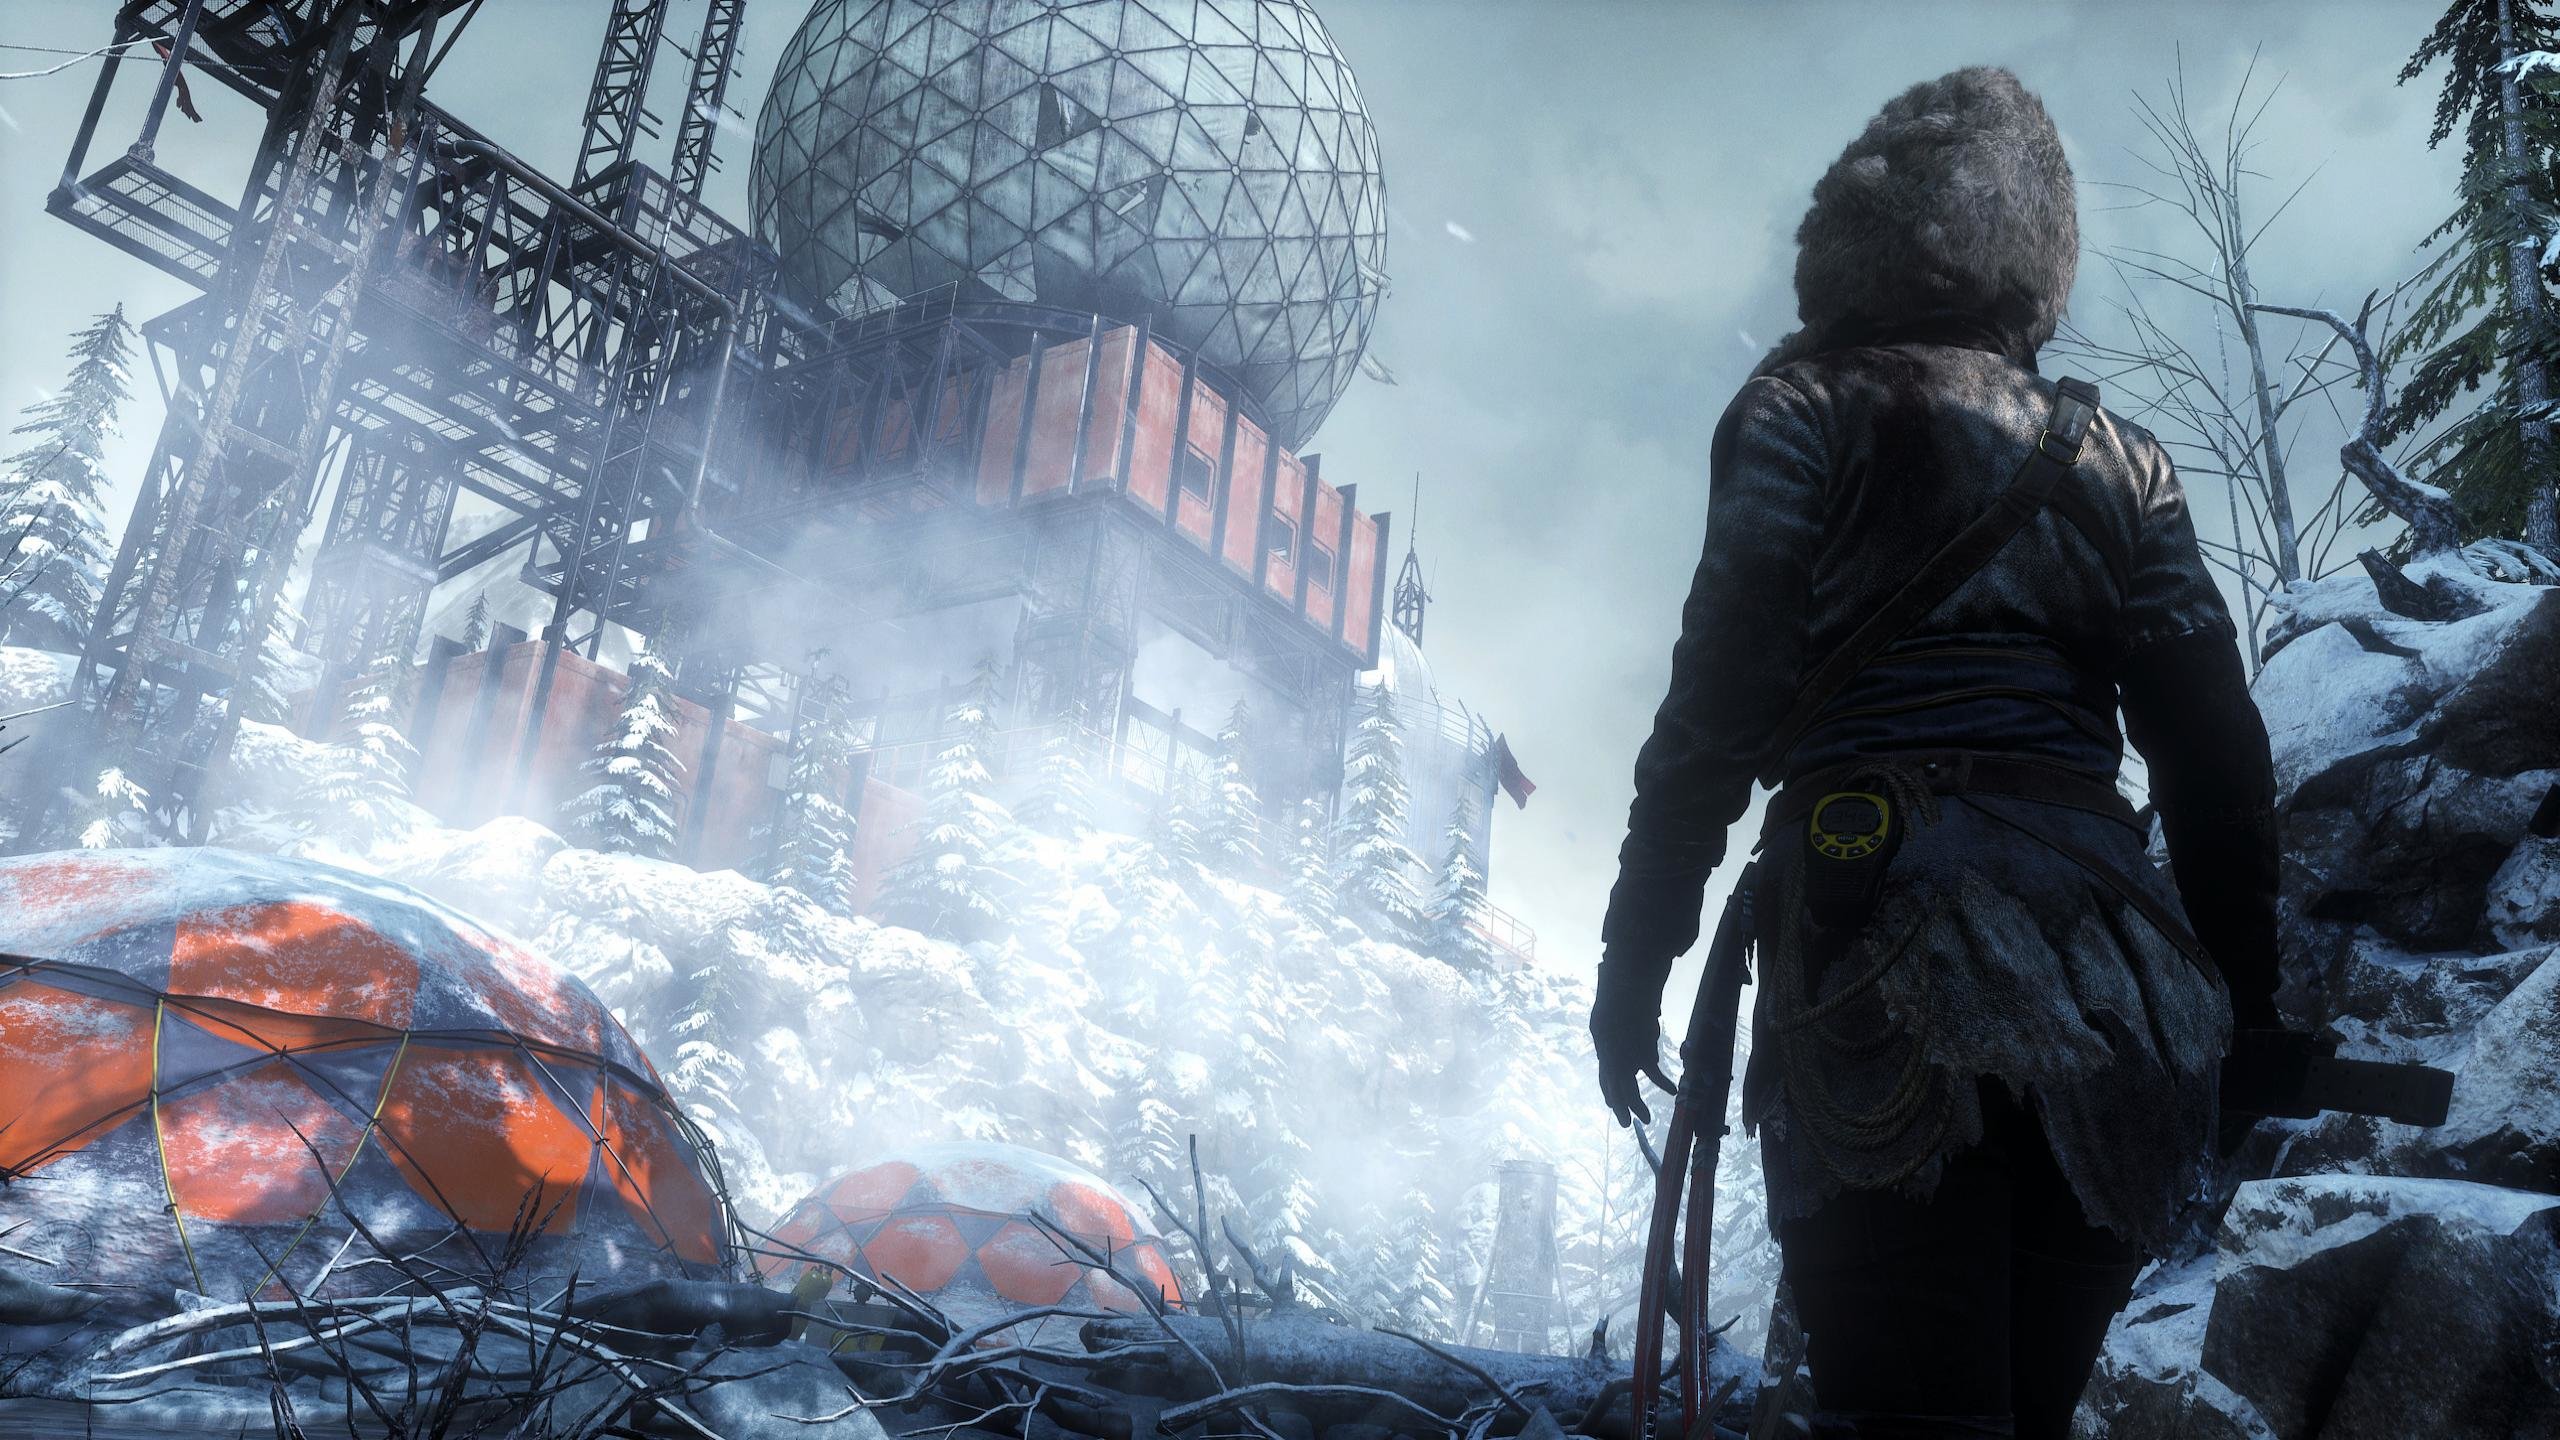 Download hd 2560x1440 Rise Of The Tomb Raider desktop background ID:83967 for free